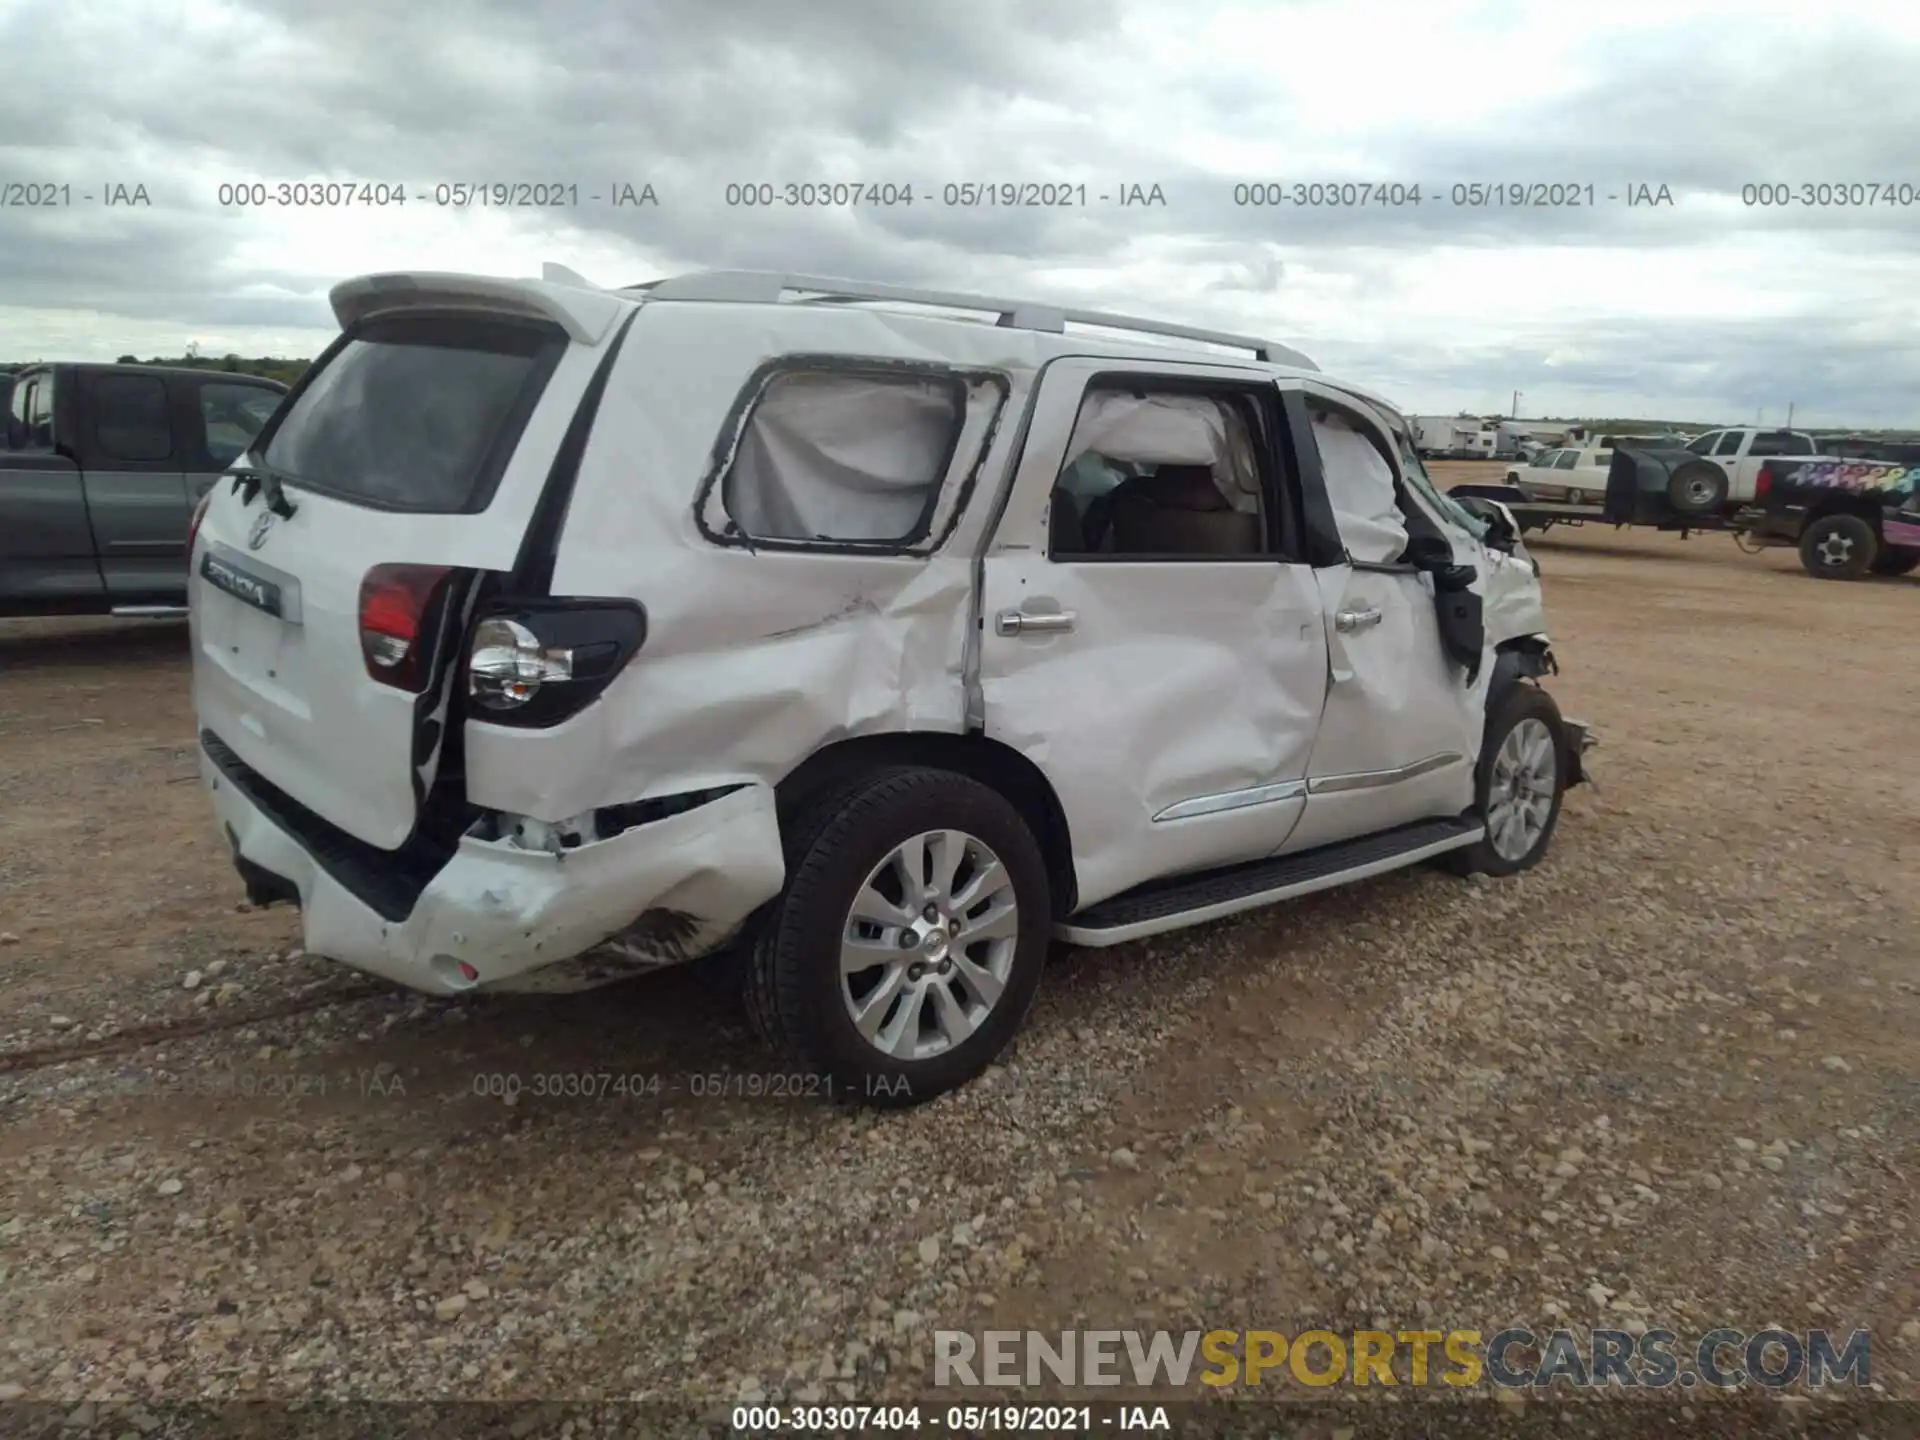 4 Photograph of a damaged car 5TDYY5G14LS074823 TOYOTA SEQUOIA 2020